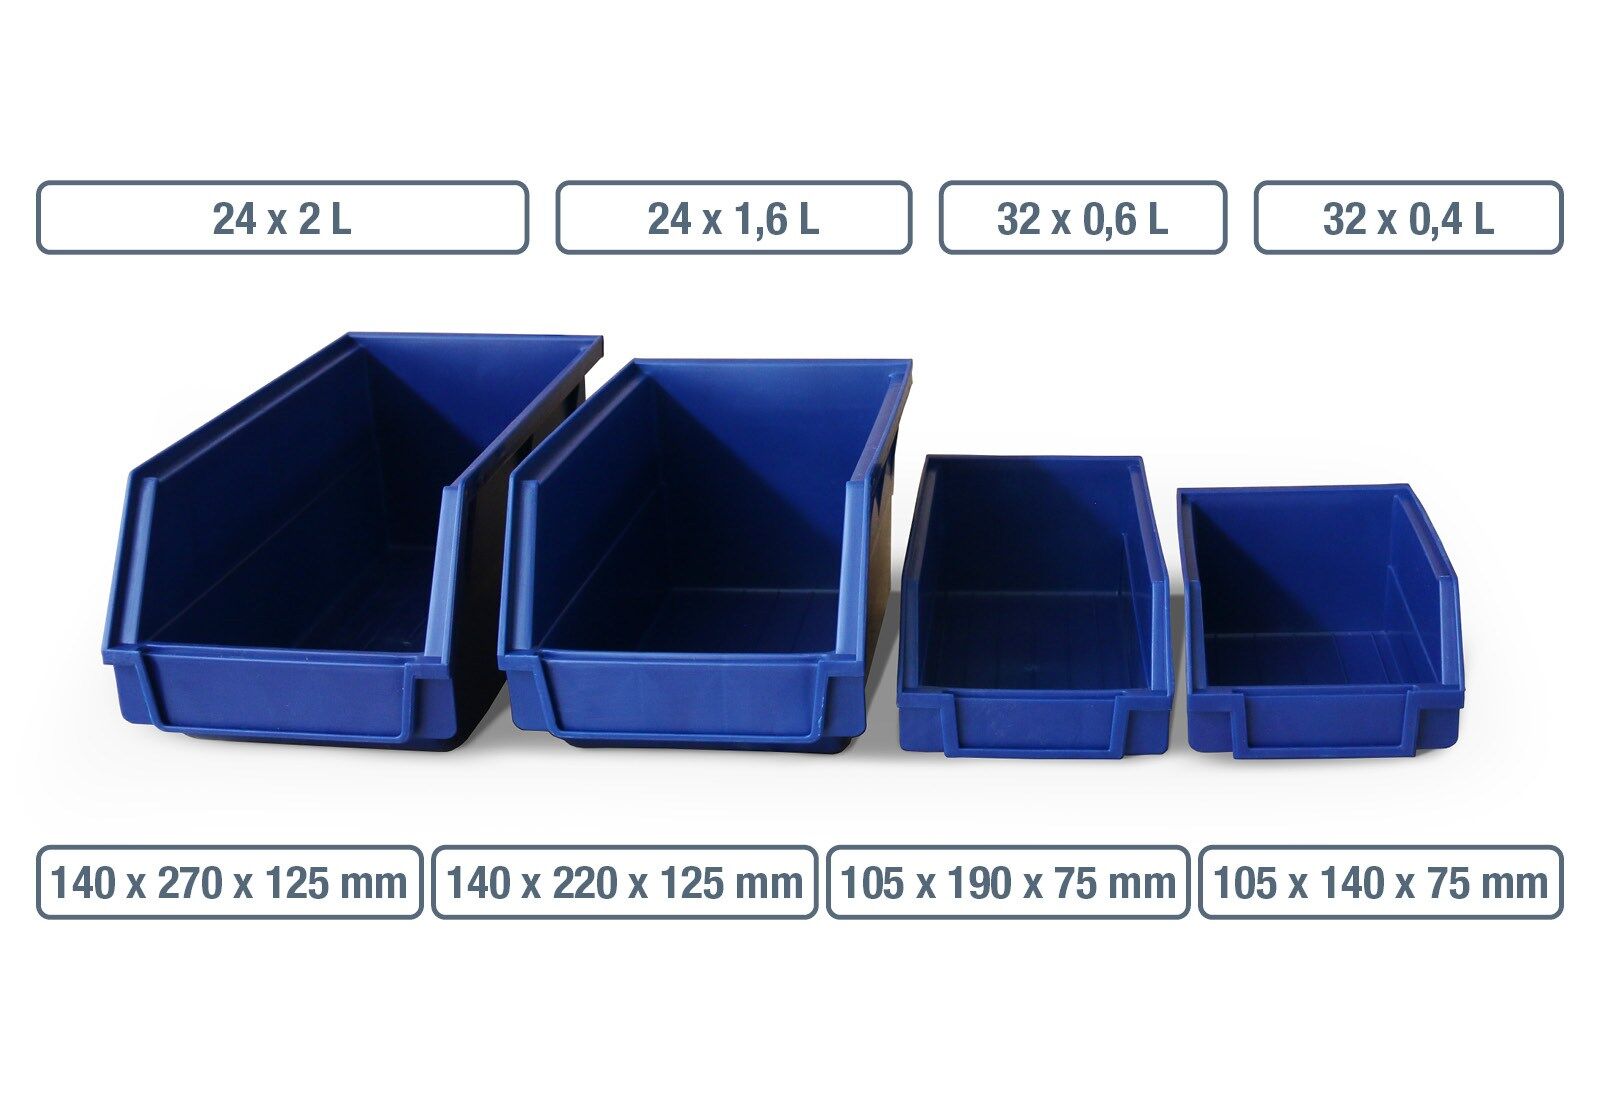 Upright Storage Baskets & Storage Containers at